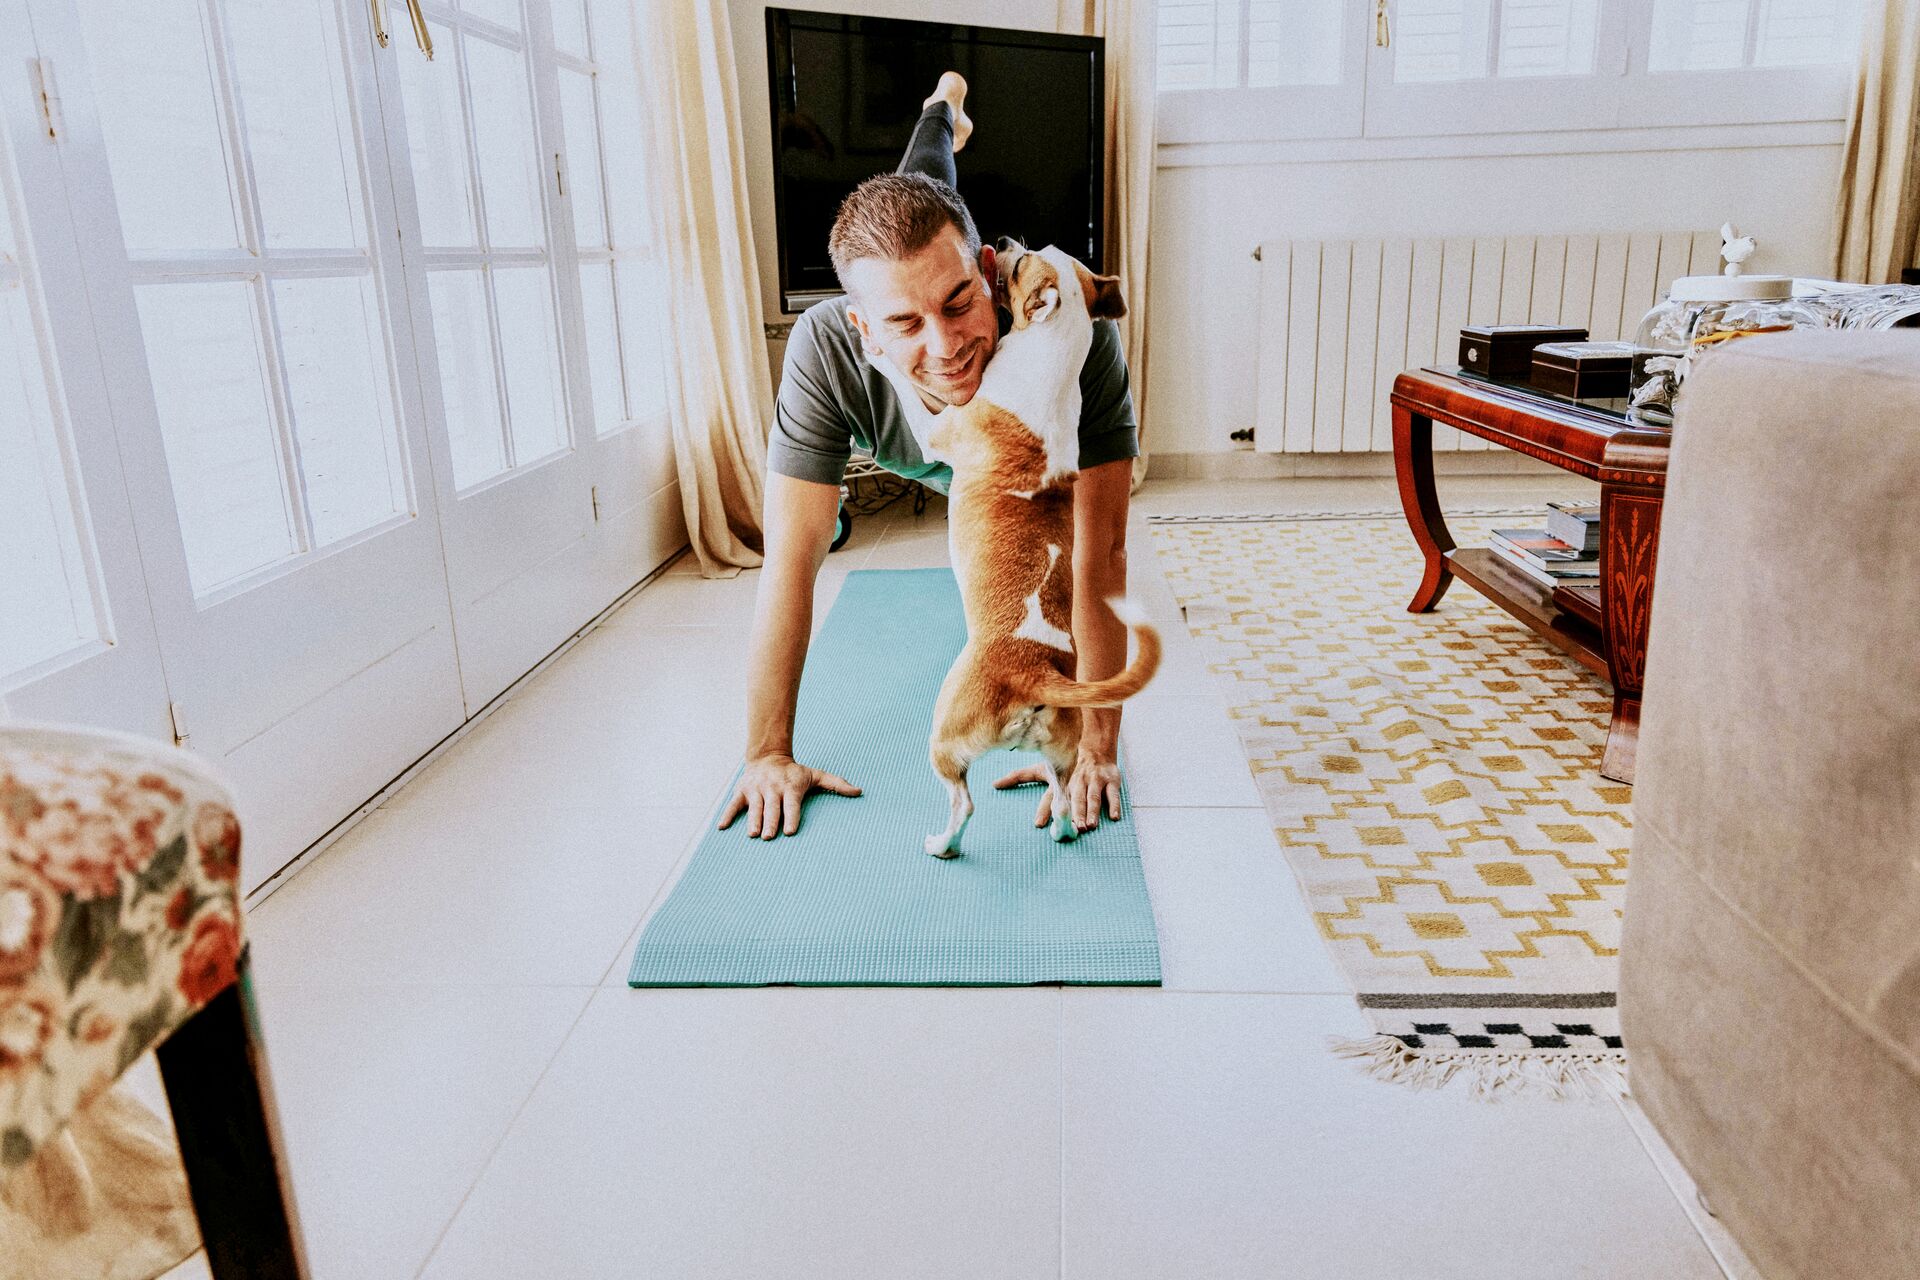 Large_MS PPT_Web-A man gets interrupted by his small dog while standing in a yoga position on a mat in the living room.jpg